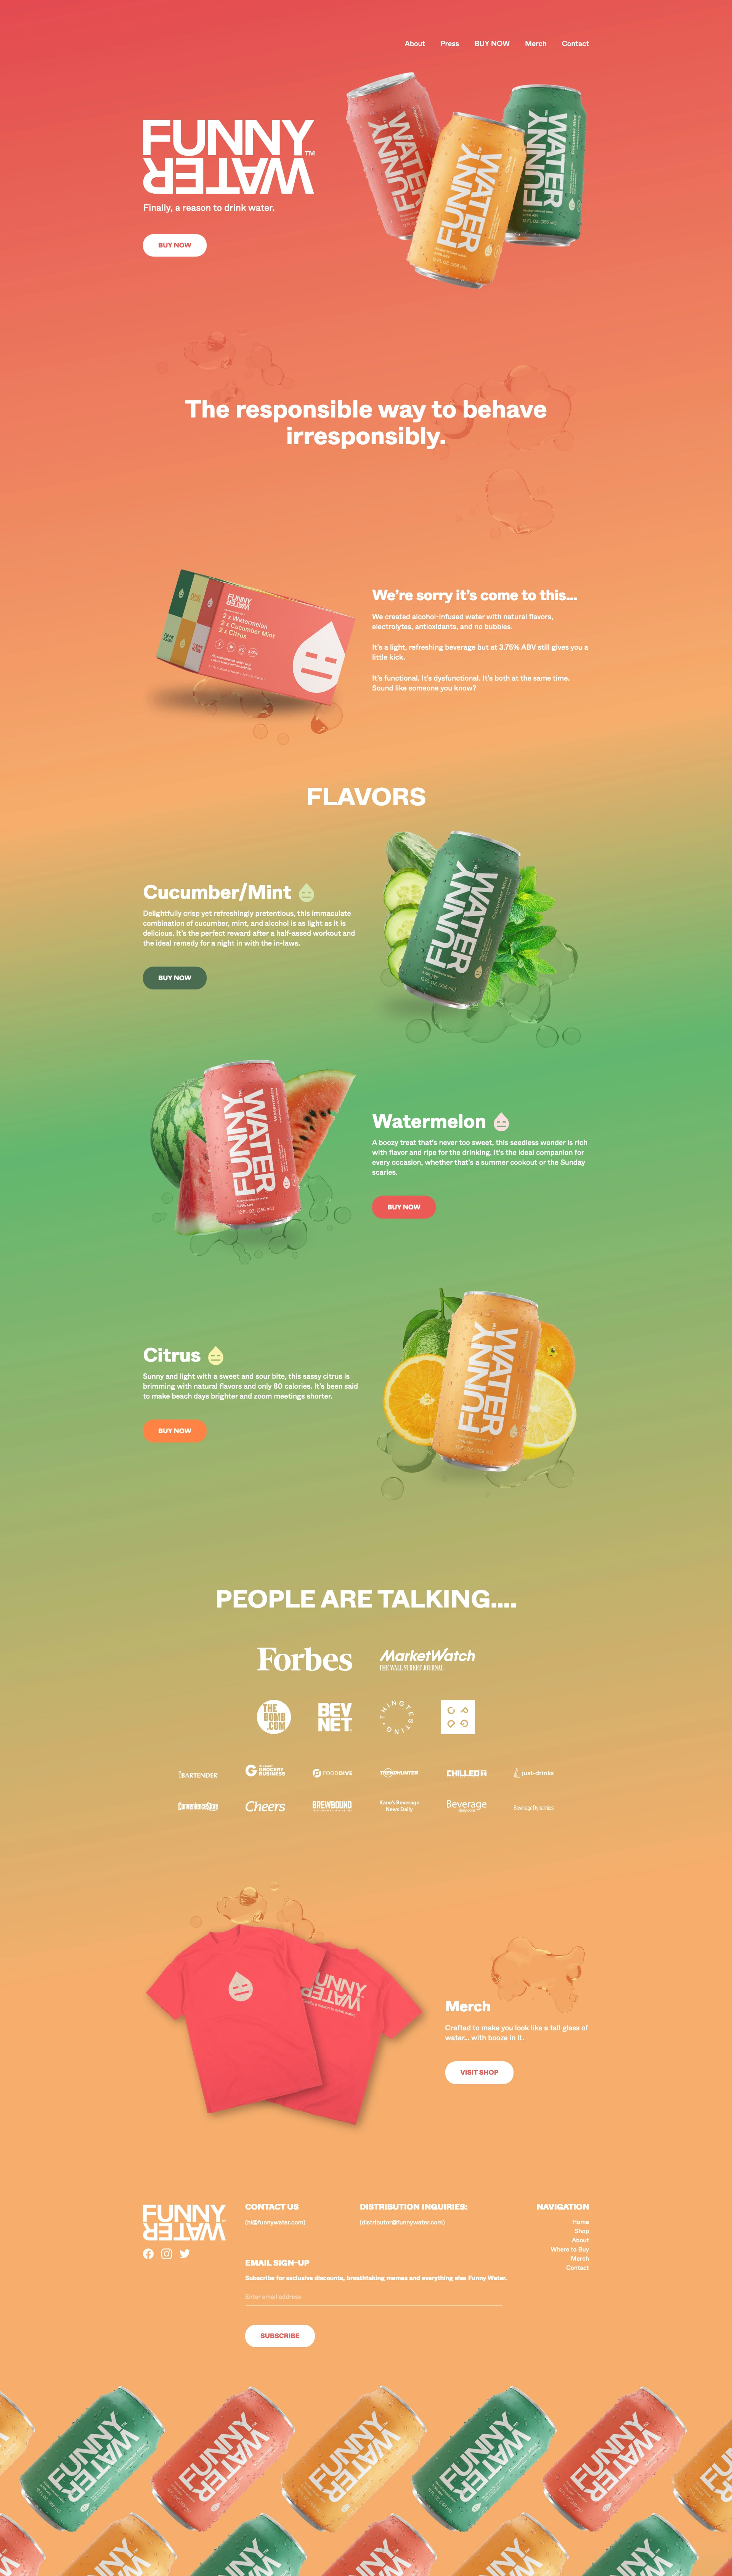 Funny Water Landing Page Example: Funny Water is alcohol-infused water with natural flavors, electrolytes, antioxidants, and no bubbles.